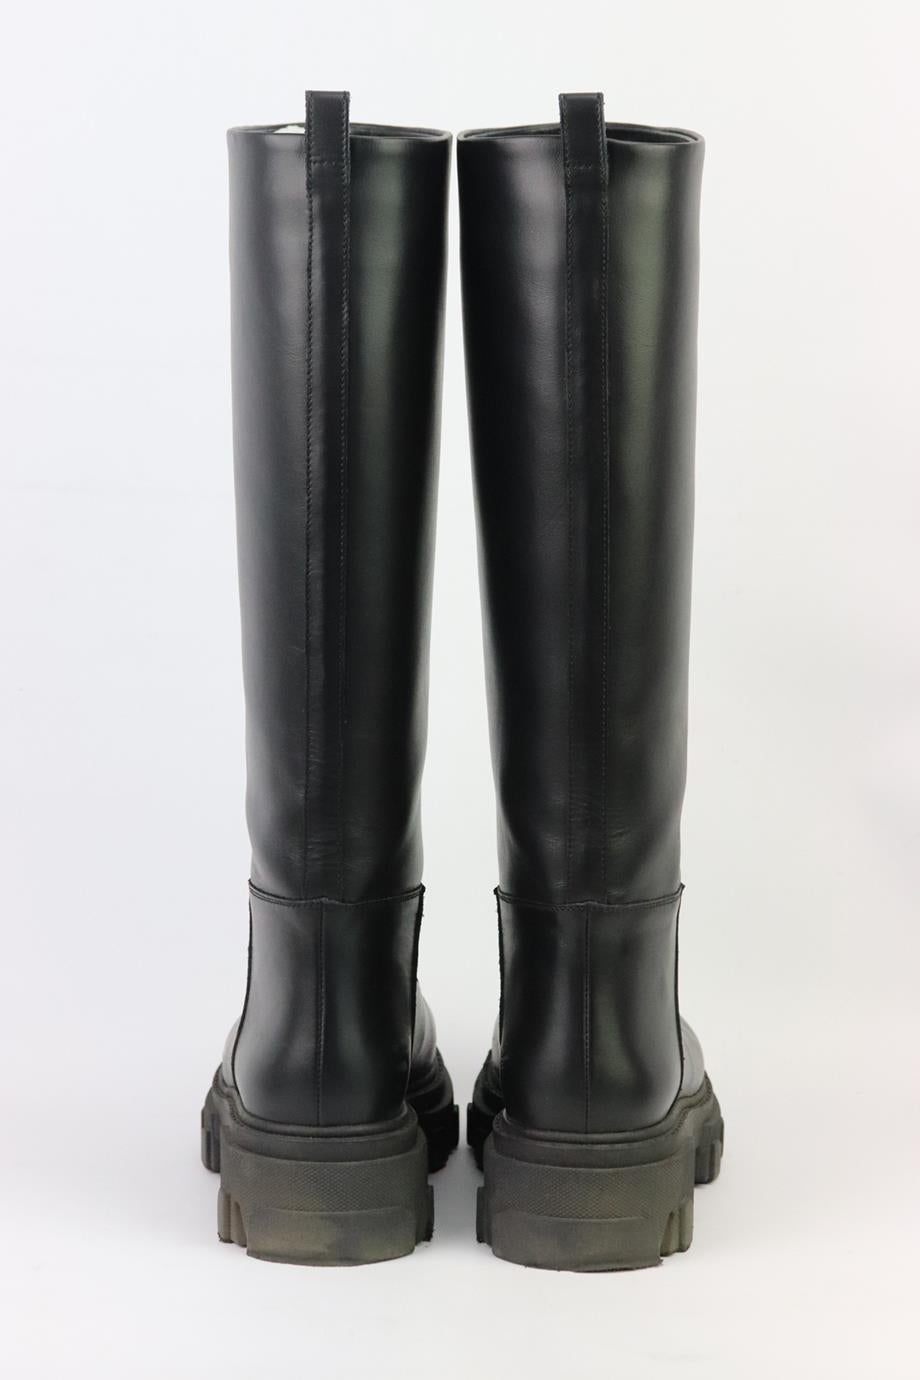 These ‘Perni 07’ boots by GIA BORGHINI in collaboration with Pernille Teisbaek are made from smooth leather and features knee-high shafts and sturdy, combat-inspired soles. Heel measures approximately 50 mm/ 2 inches. Black leather. Pull on. Comes